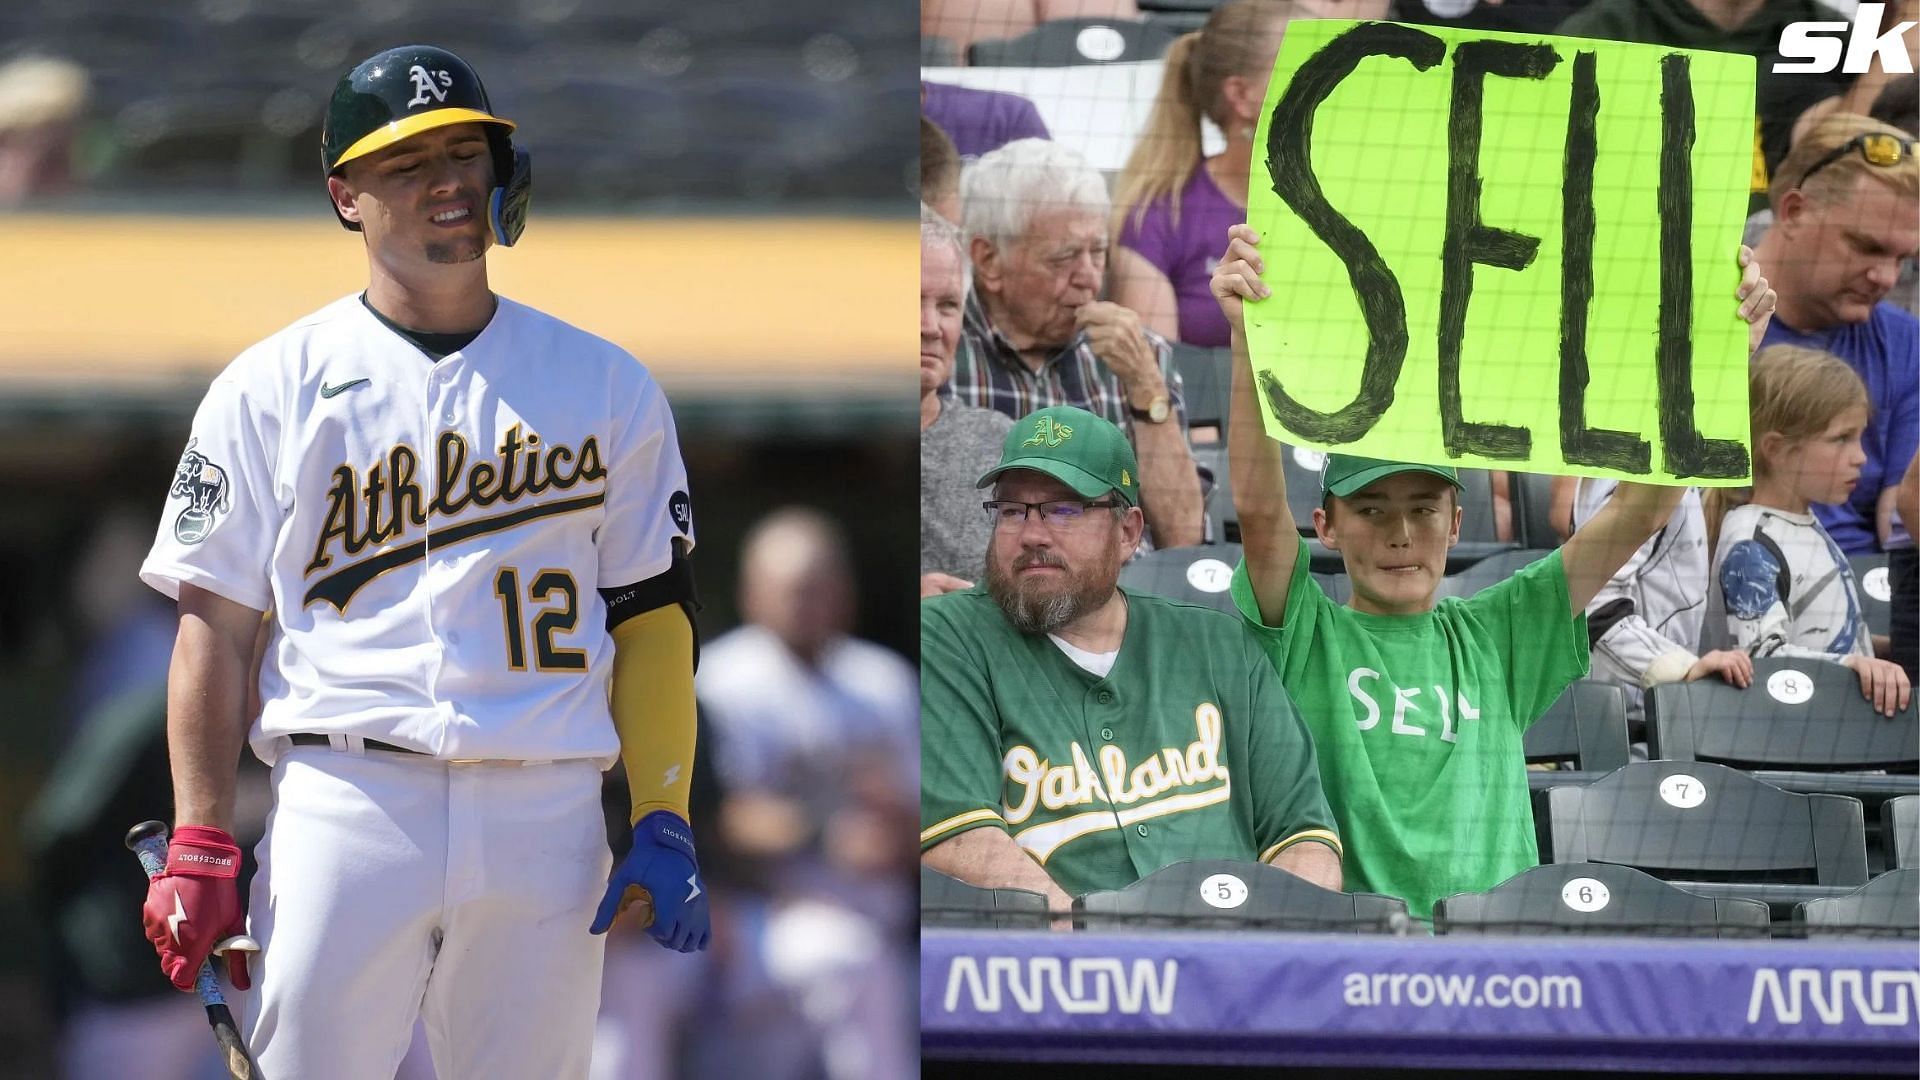 MLB appears to edit out critical Oakland A's fan signs, league